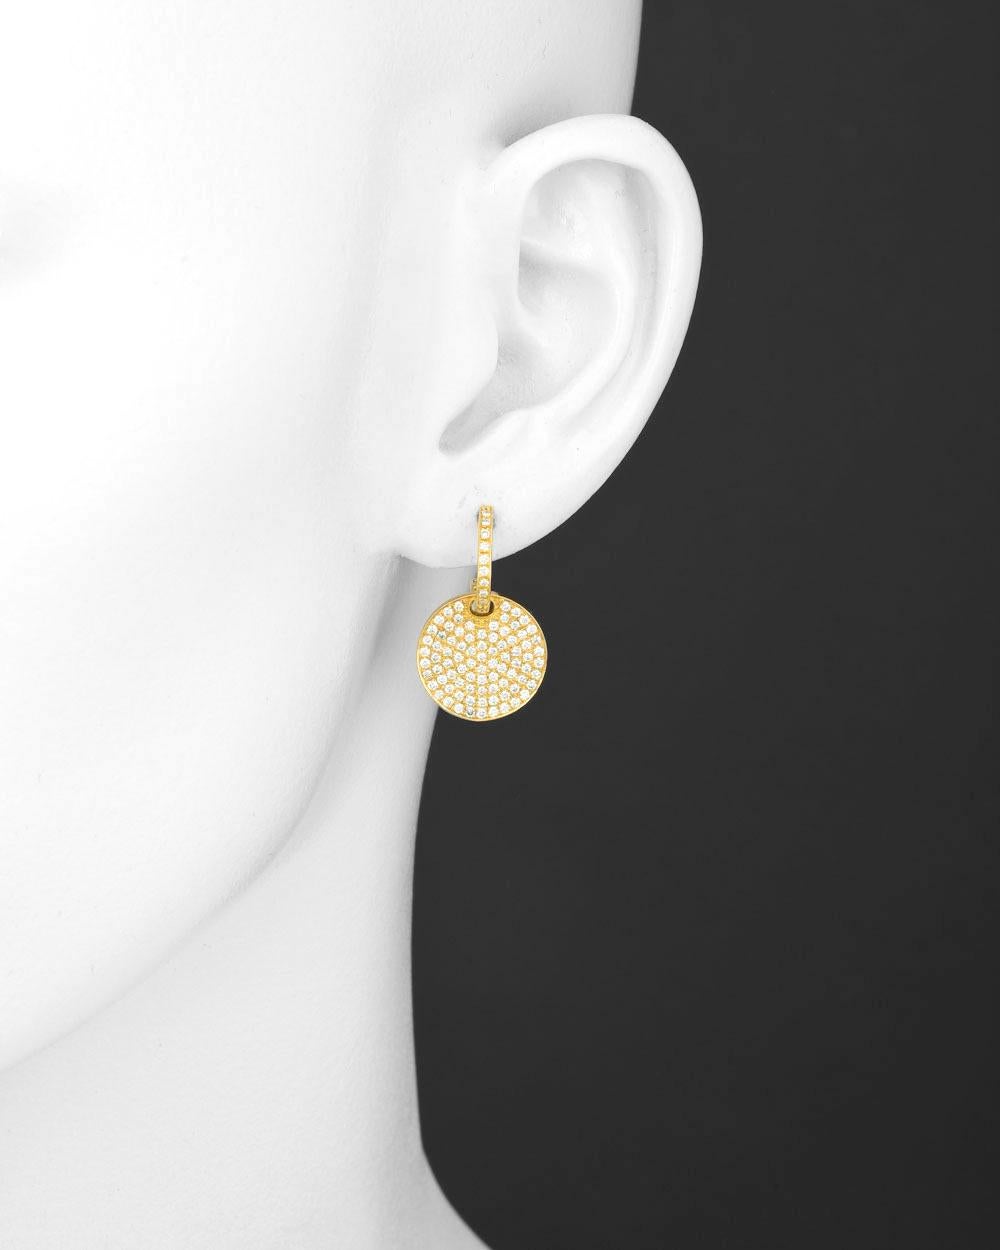 Drop earrings, featuring an elegant circular motif pavé-set with round brilliant-cut diamonds suspended from a delicate hoop set to the front with round-cut diamonds, in 18k yellow gold.

168 diamonds weighing 1.10 total carats (G-H color/SI